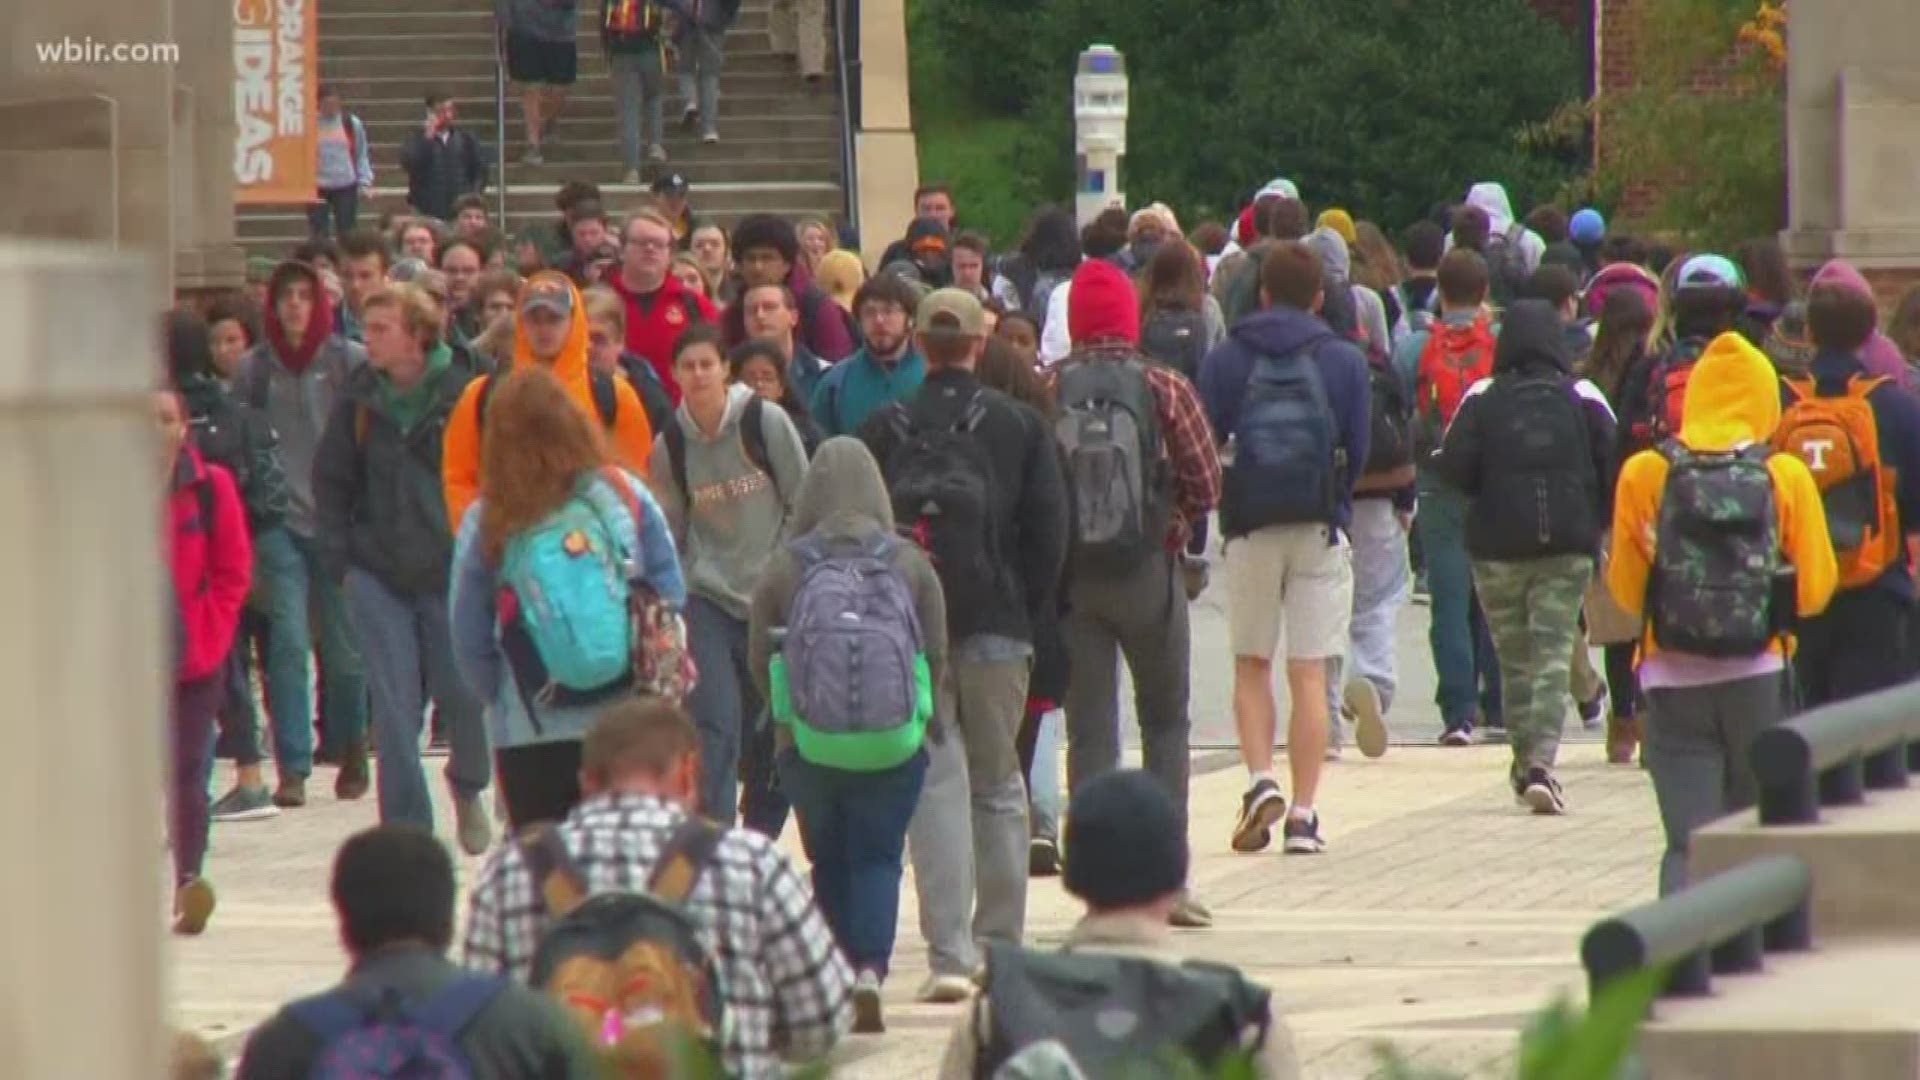 Leaders at the University of Tennessee says its looking to knock down financial barriers for students in a big way. The UT Promise scholarship will officially launch in Fall of 2020.